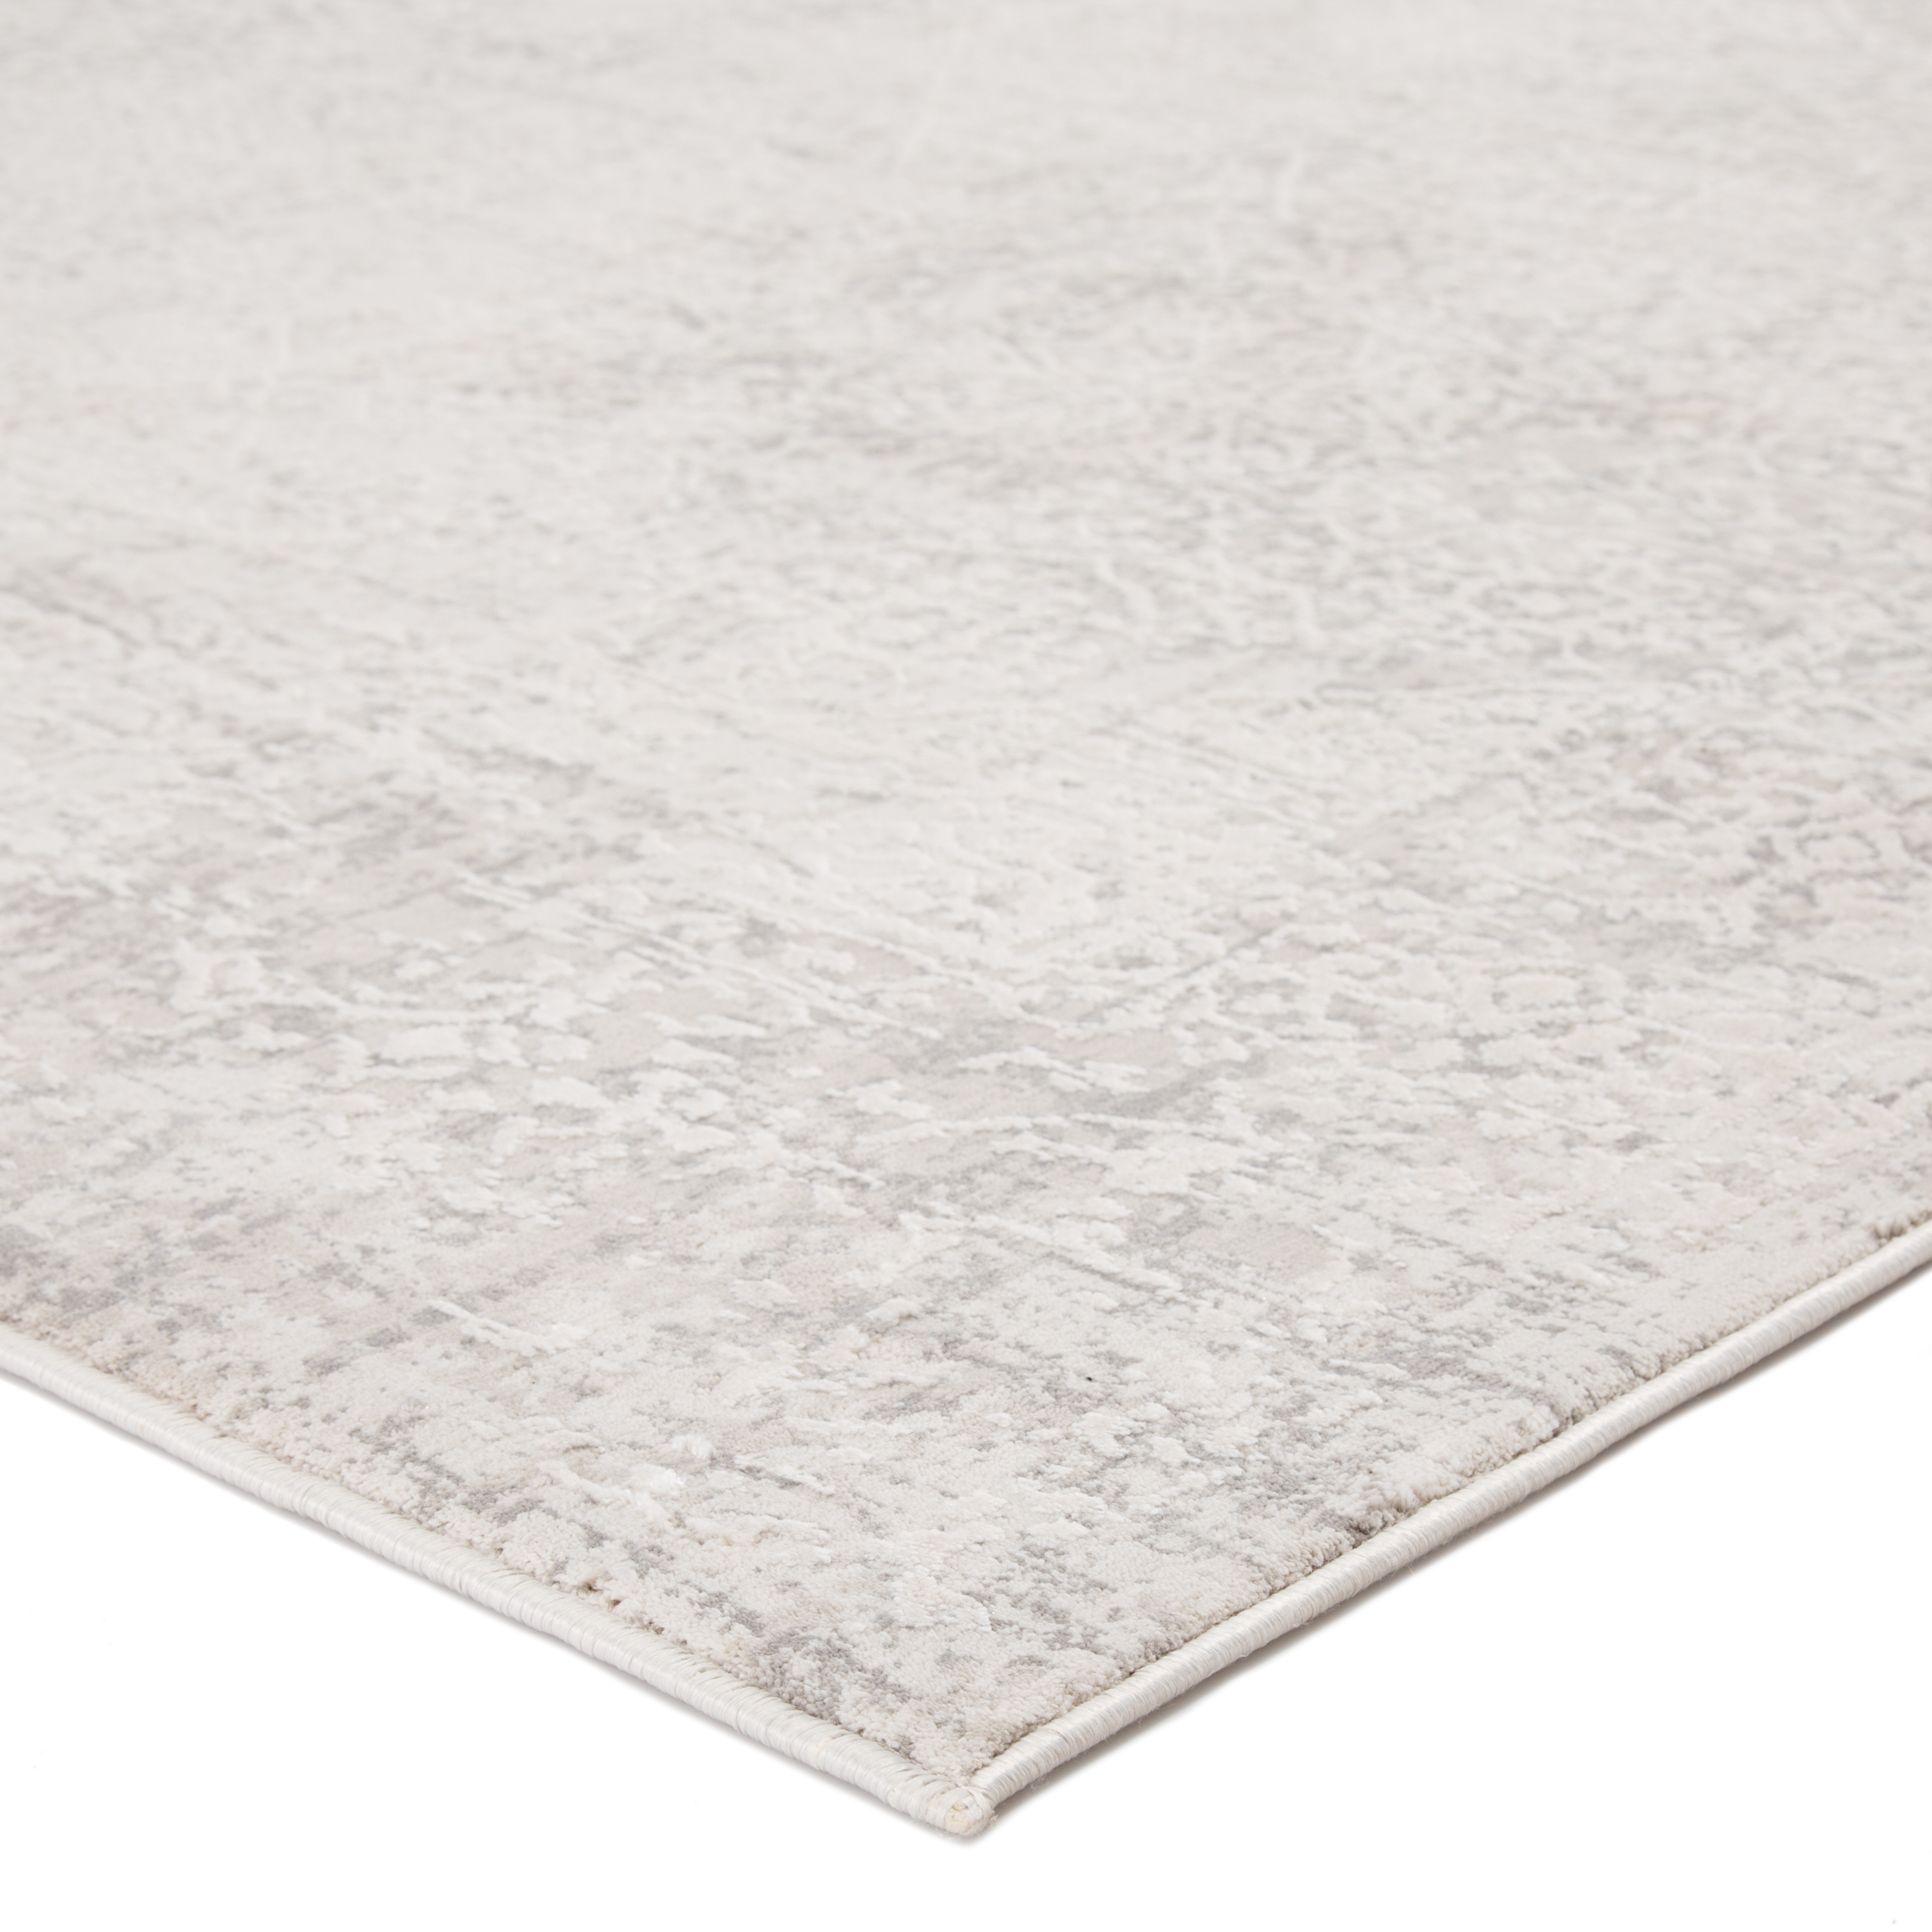 Lianna Abstract Silver/ White Area Rug (10' X 14') - Image 1